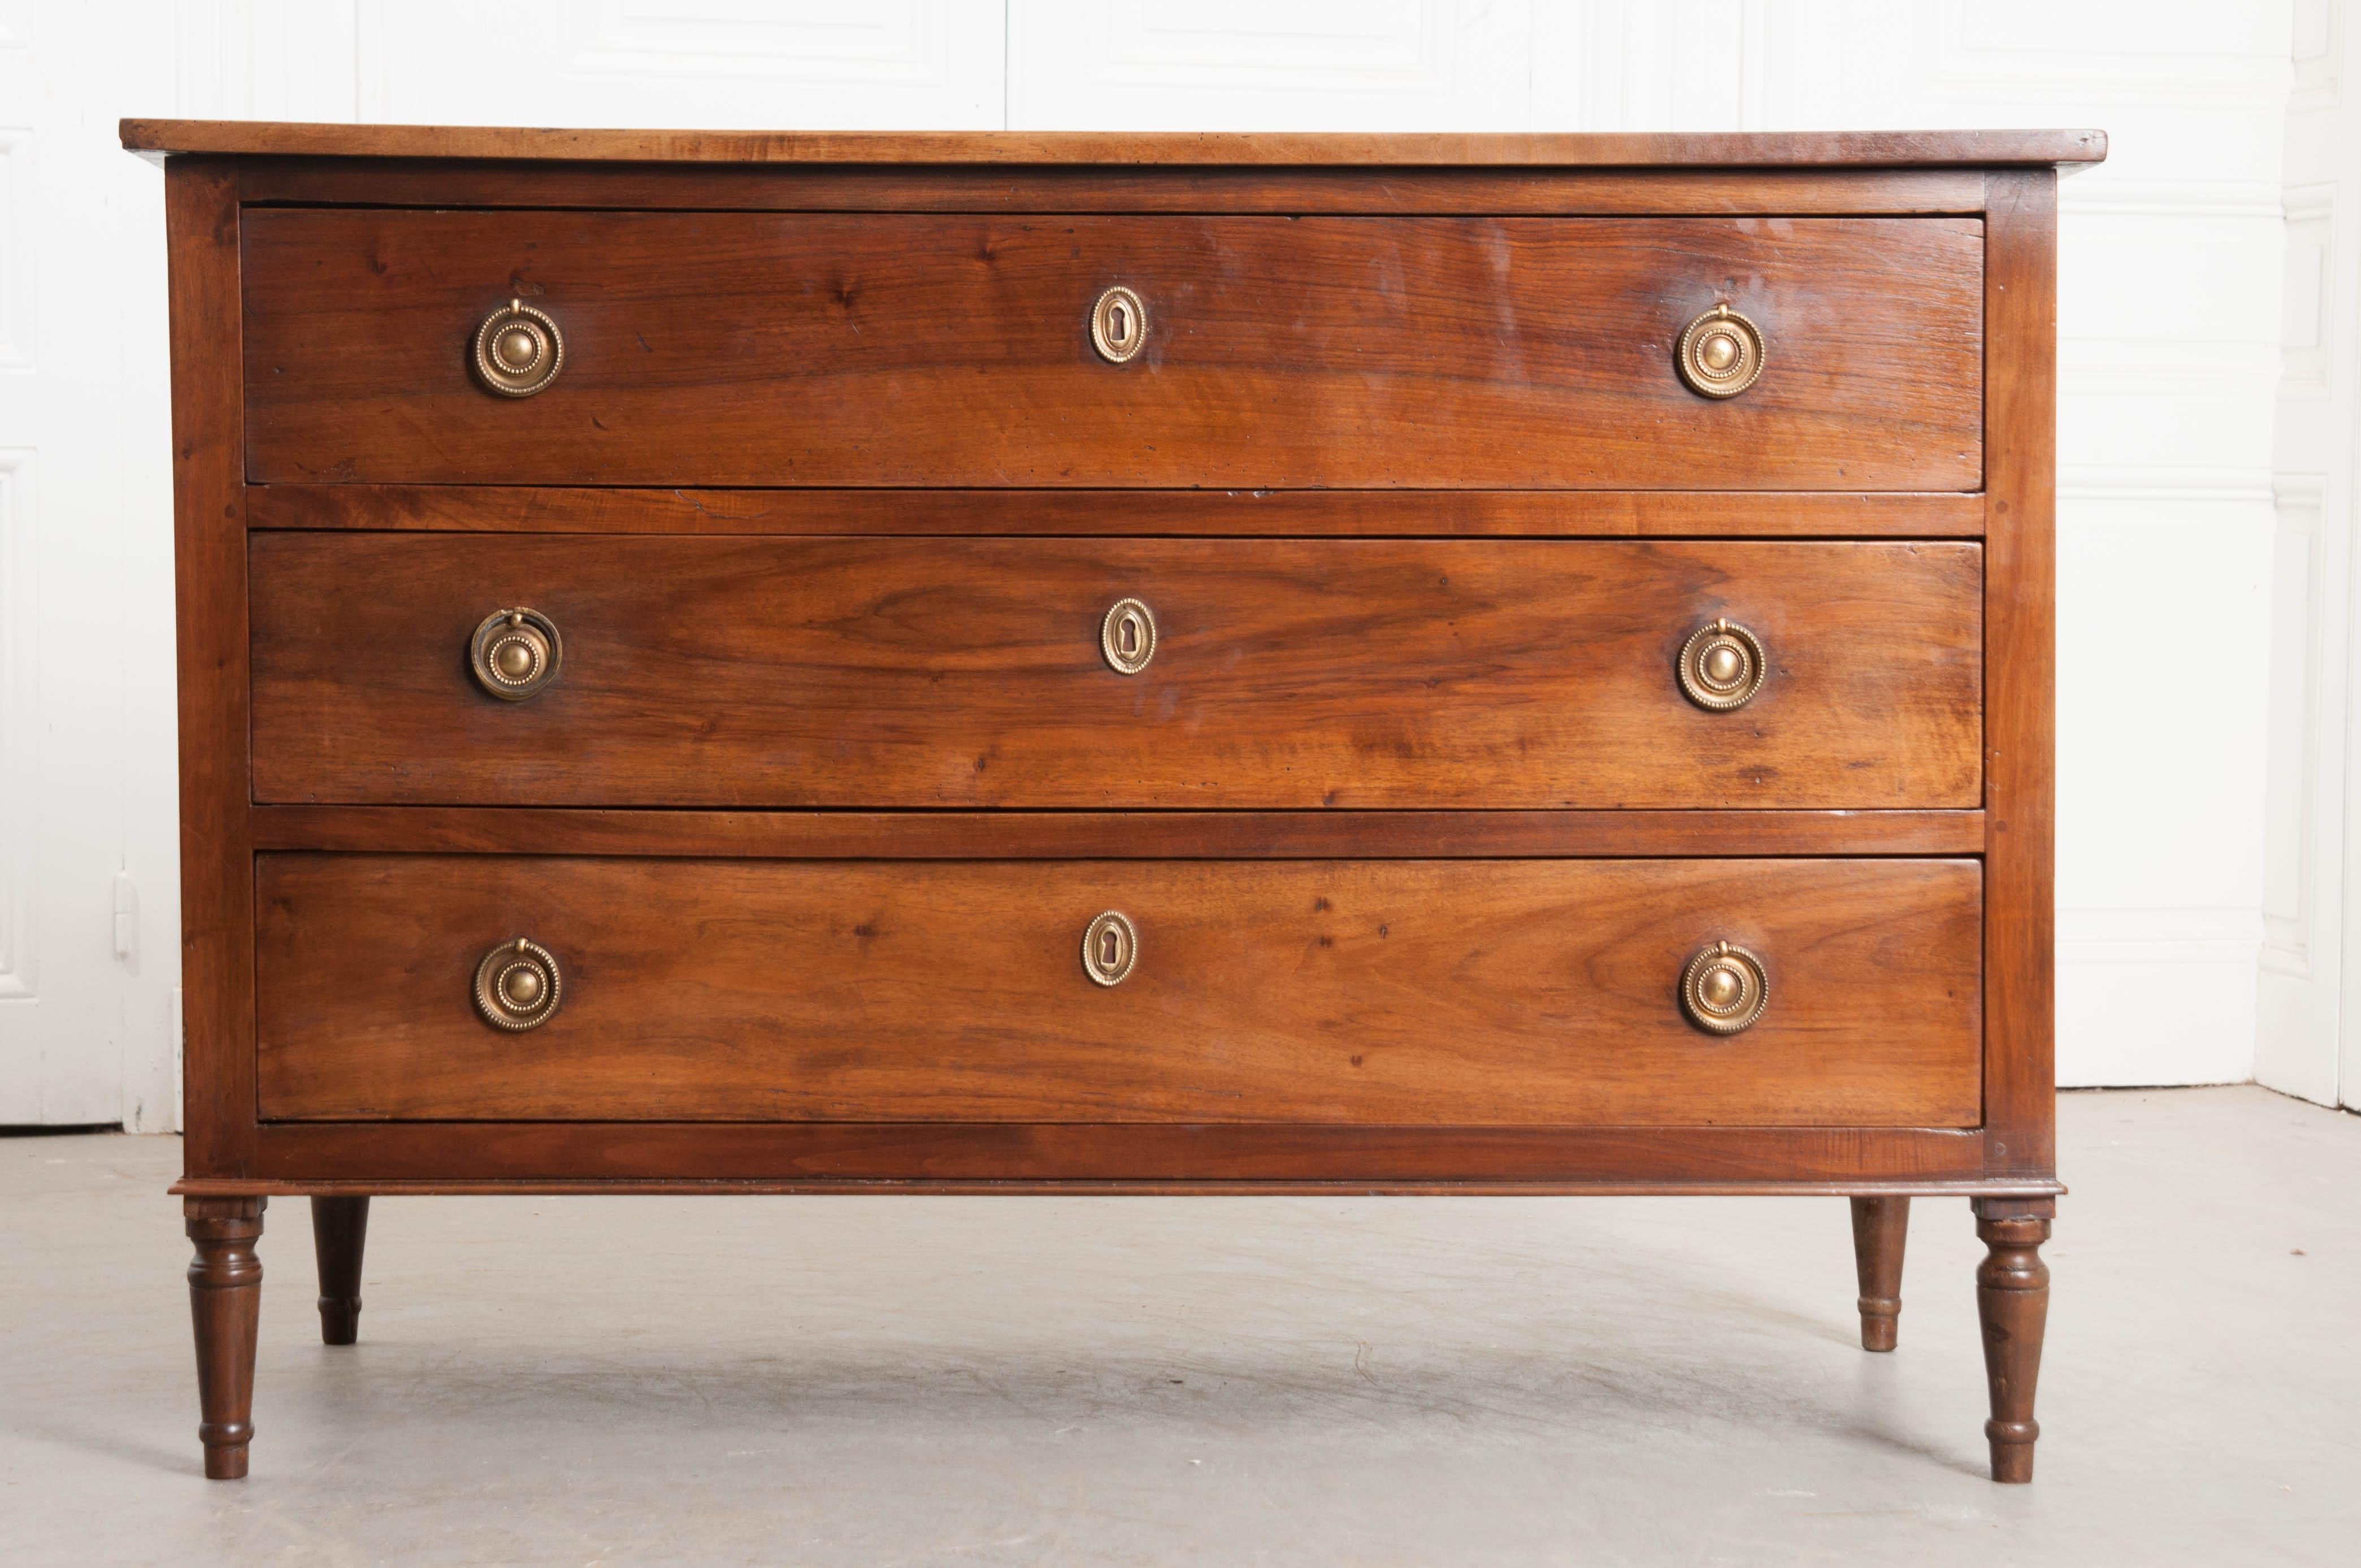 A fantastic solid walnut Louis XVI style commode from 19th century France. The commode’s simple styling allows the exceptionally beautiful walnut speak for itself. Three wide drawers can be found in the case piece, each equipped with oval beaded